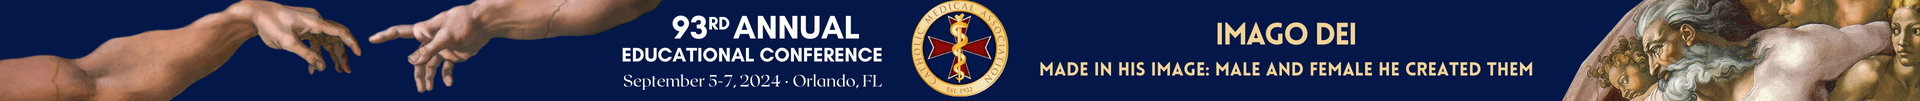 Catholic Medical Association's Annual Education Conference